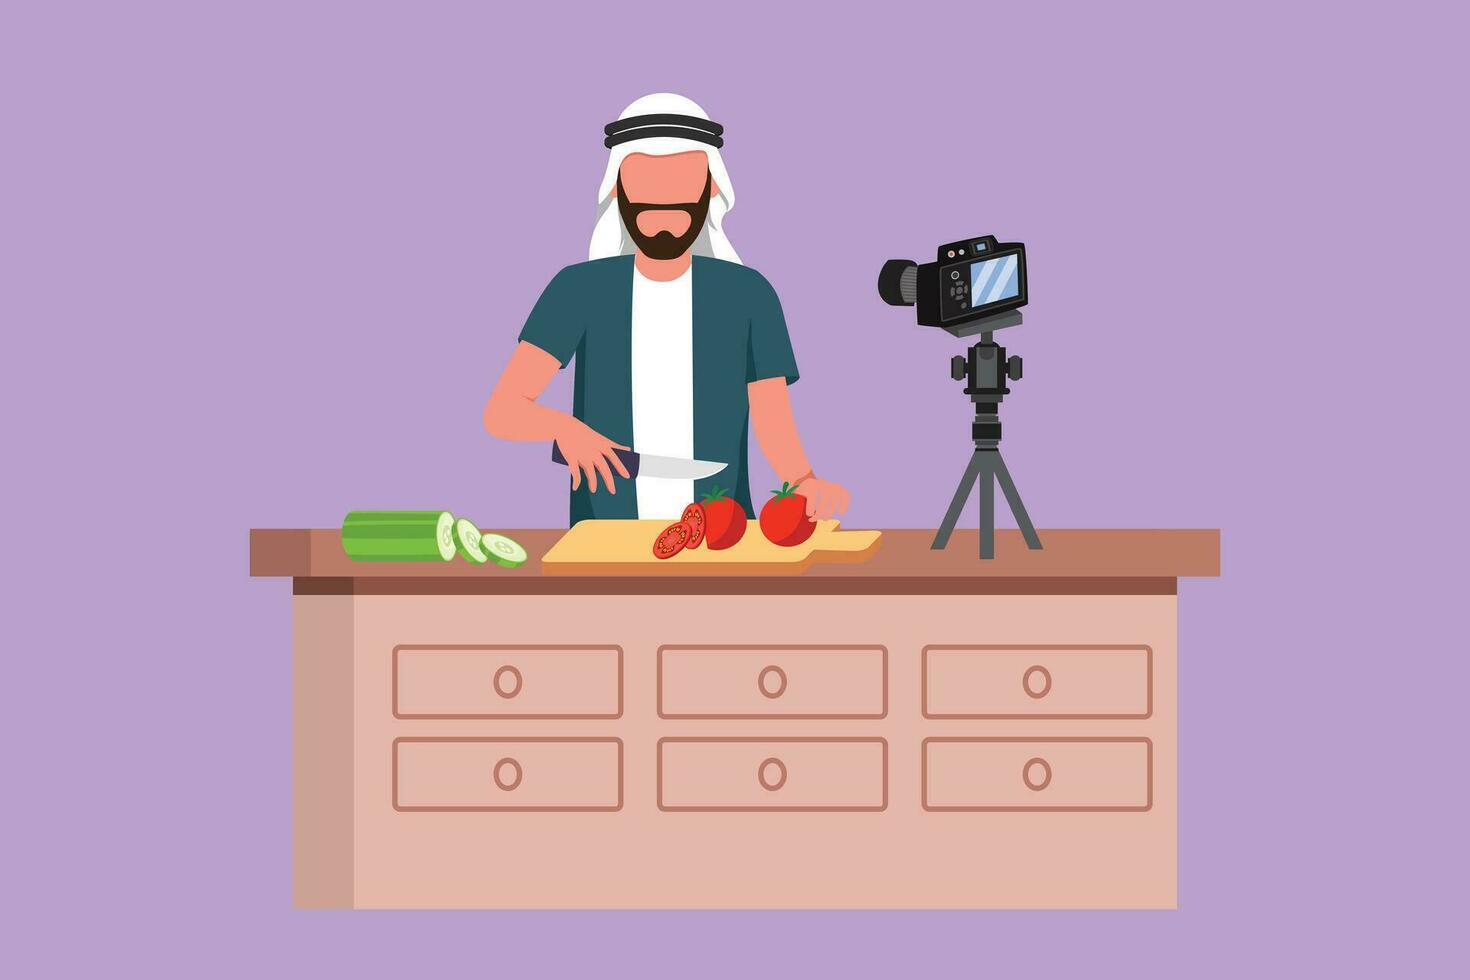 Character flat drawing young Arabian chef standing in kitchen and cutting onion while filming himself for blog channel. On kitchen counter are vegetables and spices. Cartoon design vector illustration